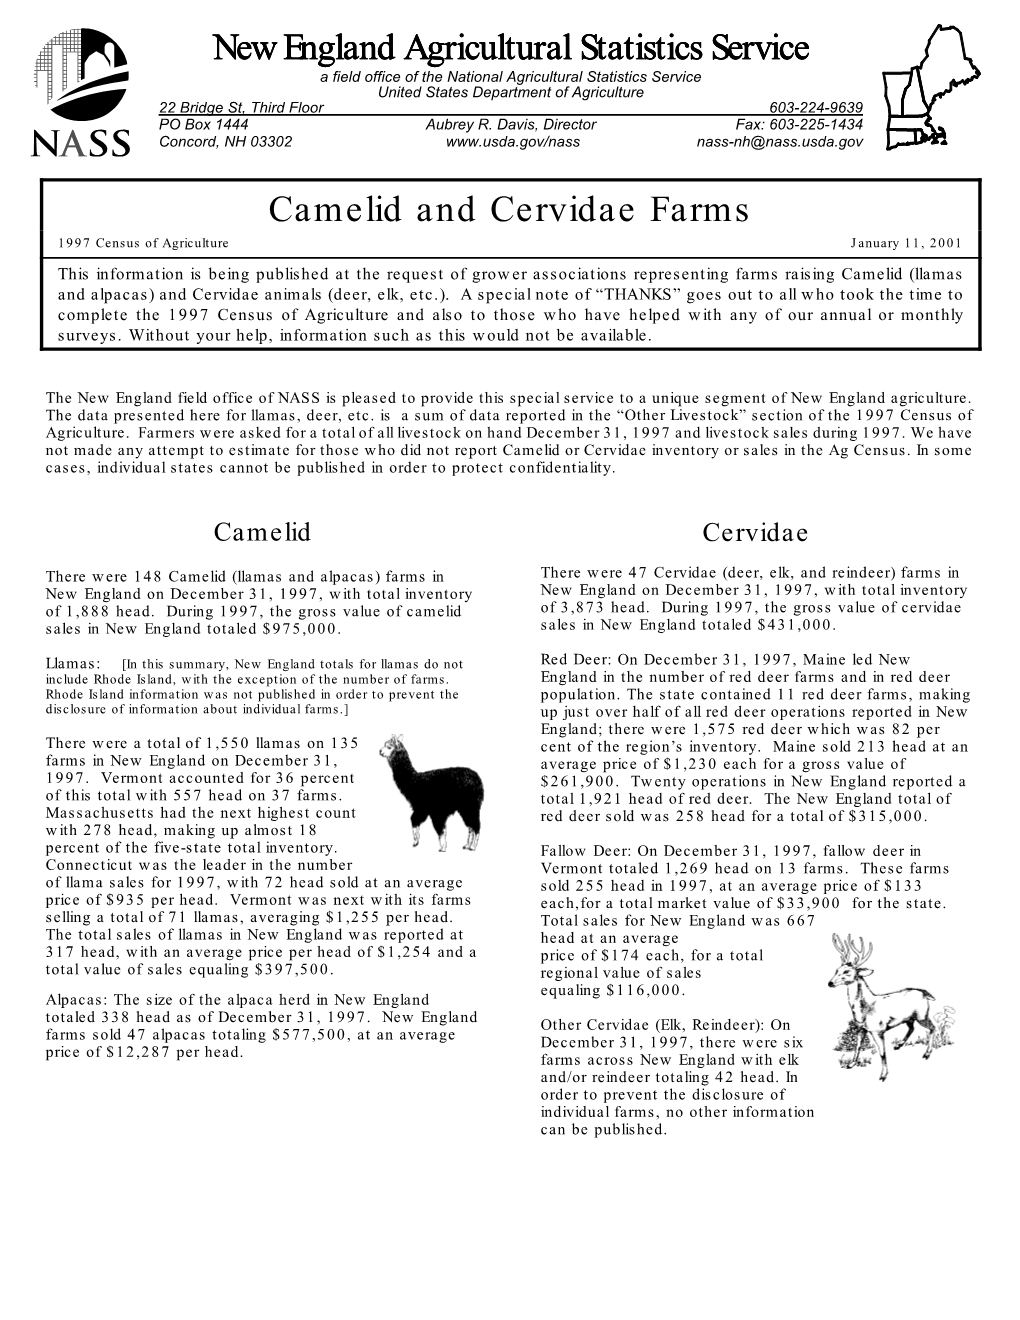 Camelid and Cervidae Farms New England Agricultural Statistics Service